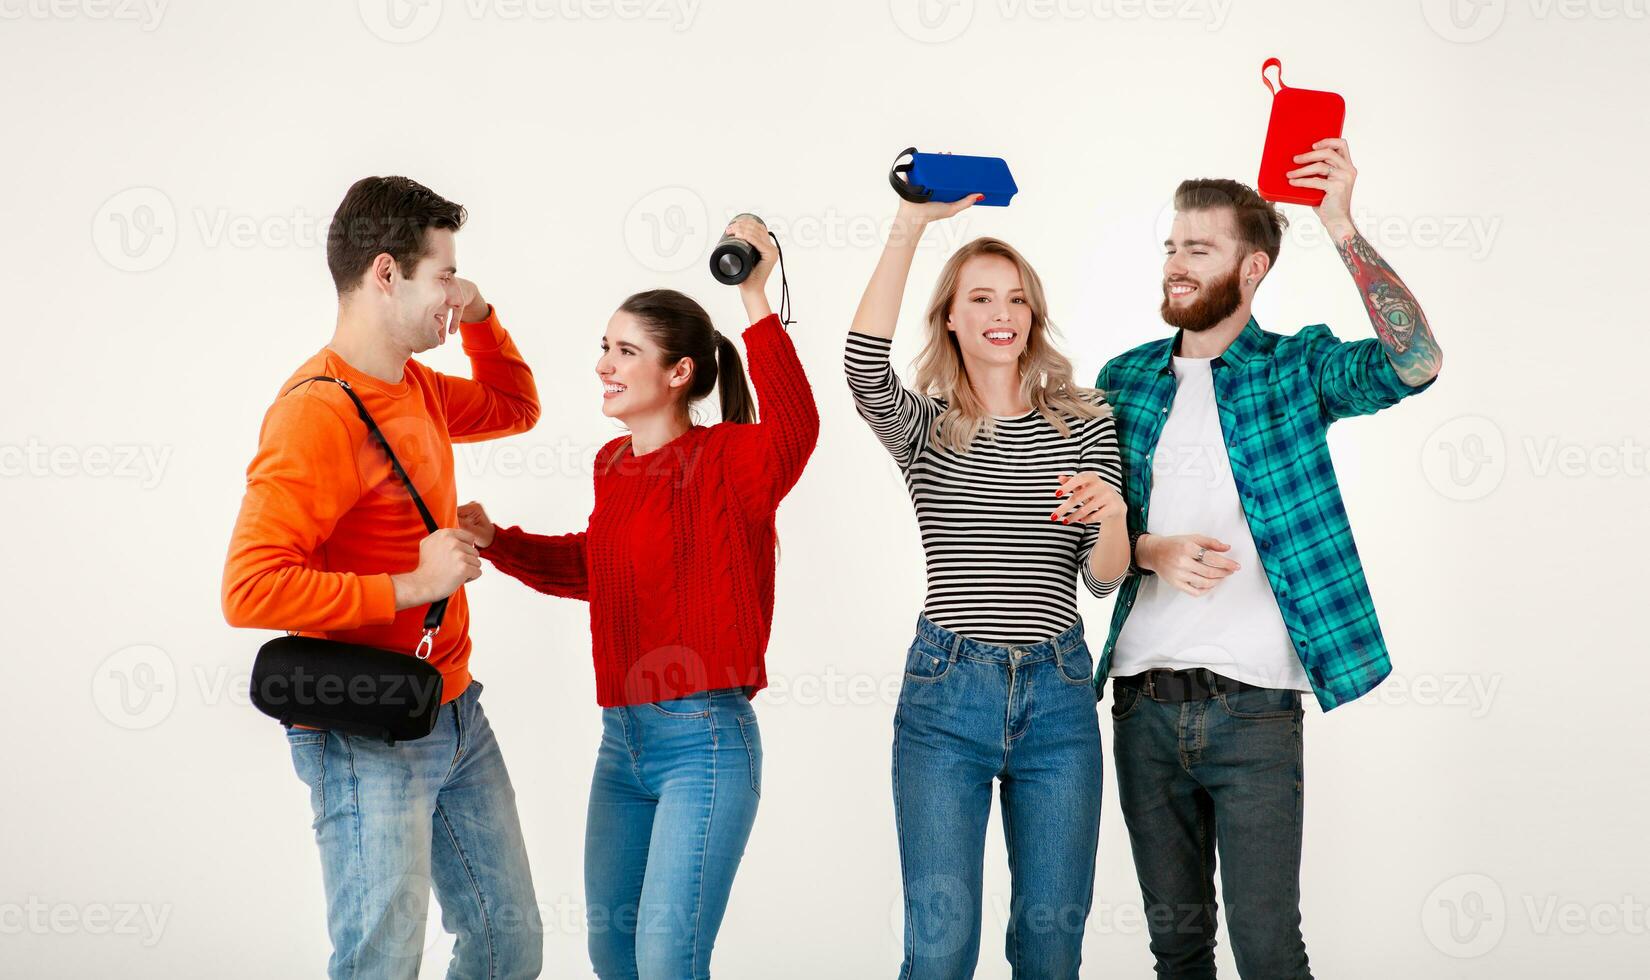 company of friends having fun together listening to music photo